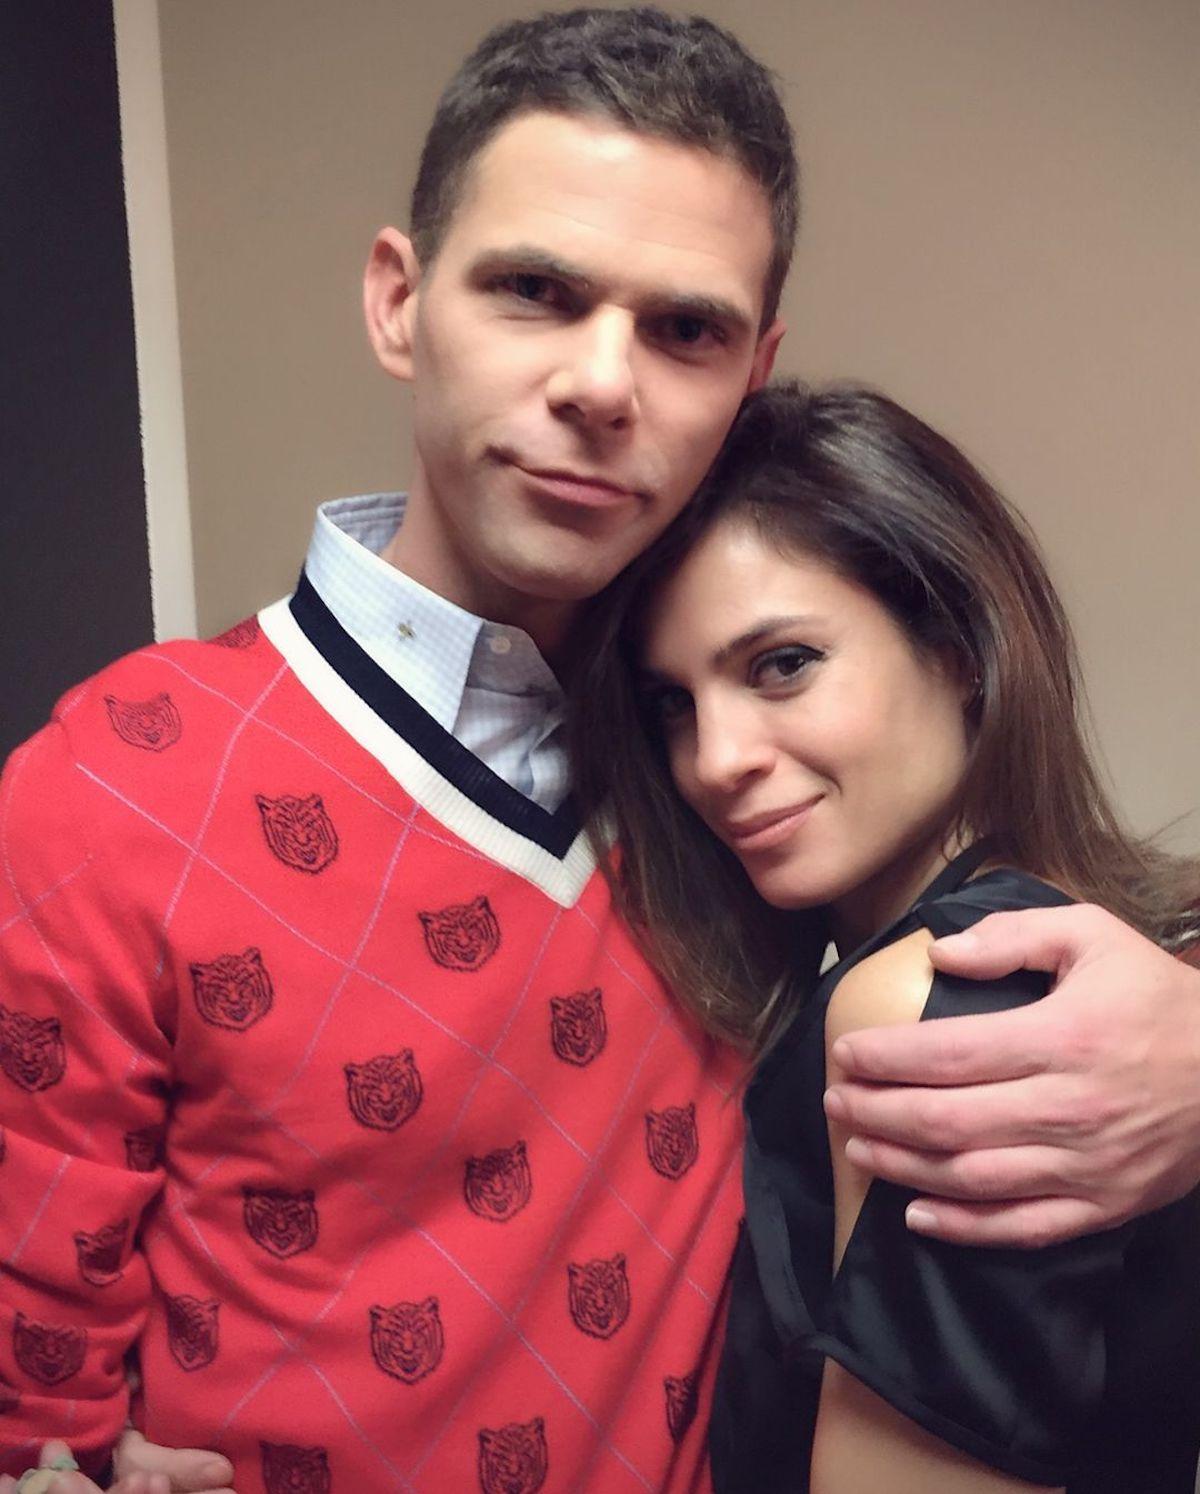 Mikey Day and his partner Paula Christensen